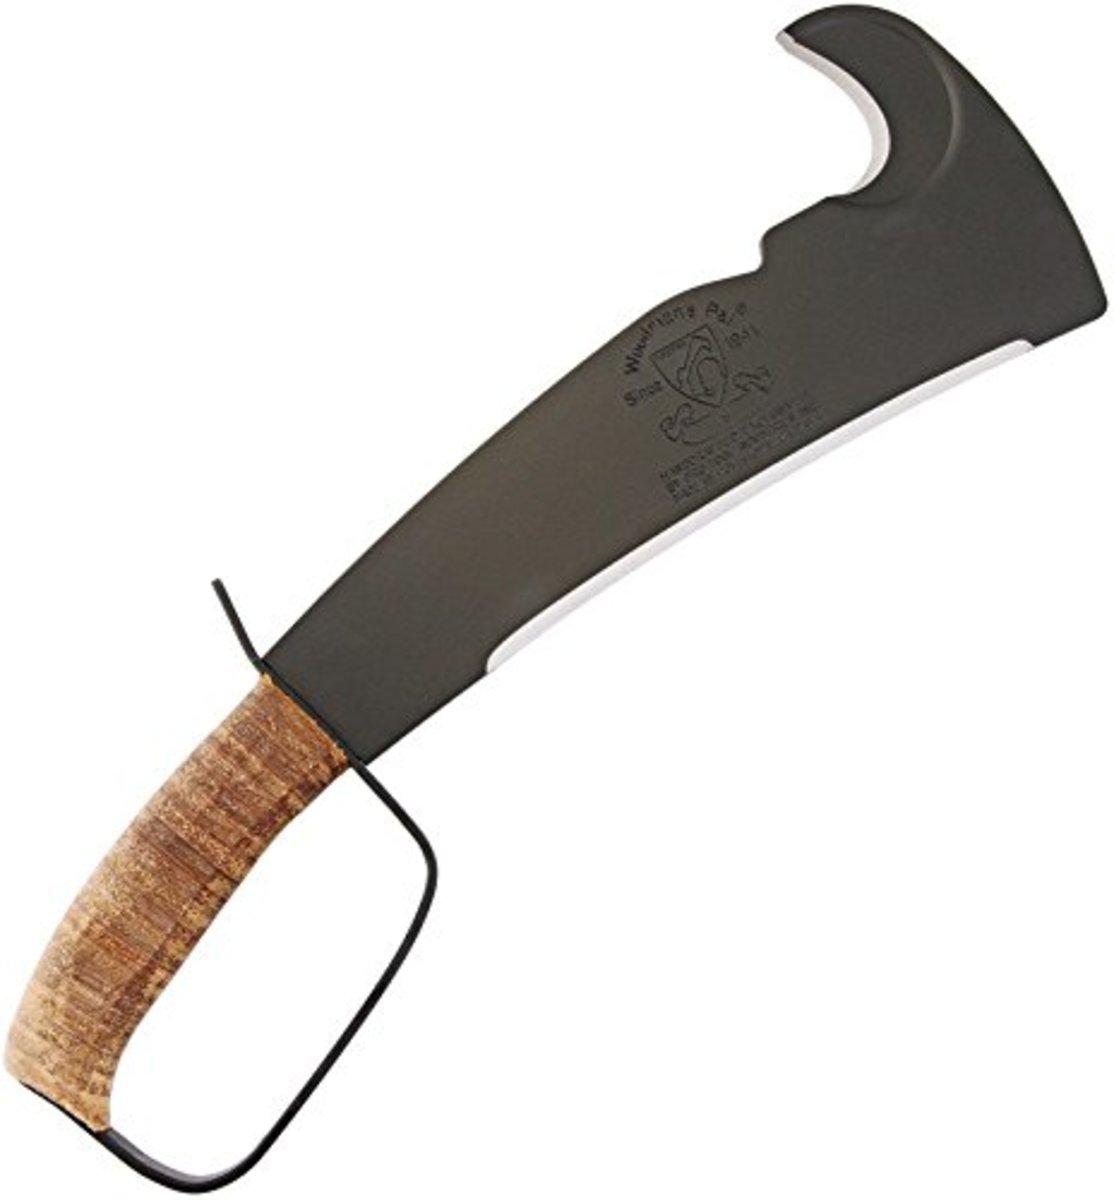 the-machete-your-extraordinary-all-around-chopper-pruner-and-survival-utility-tool